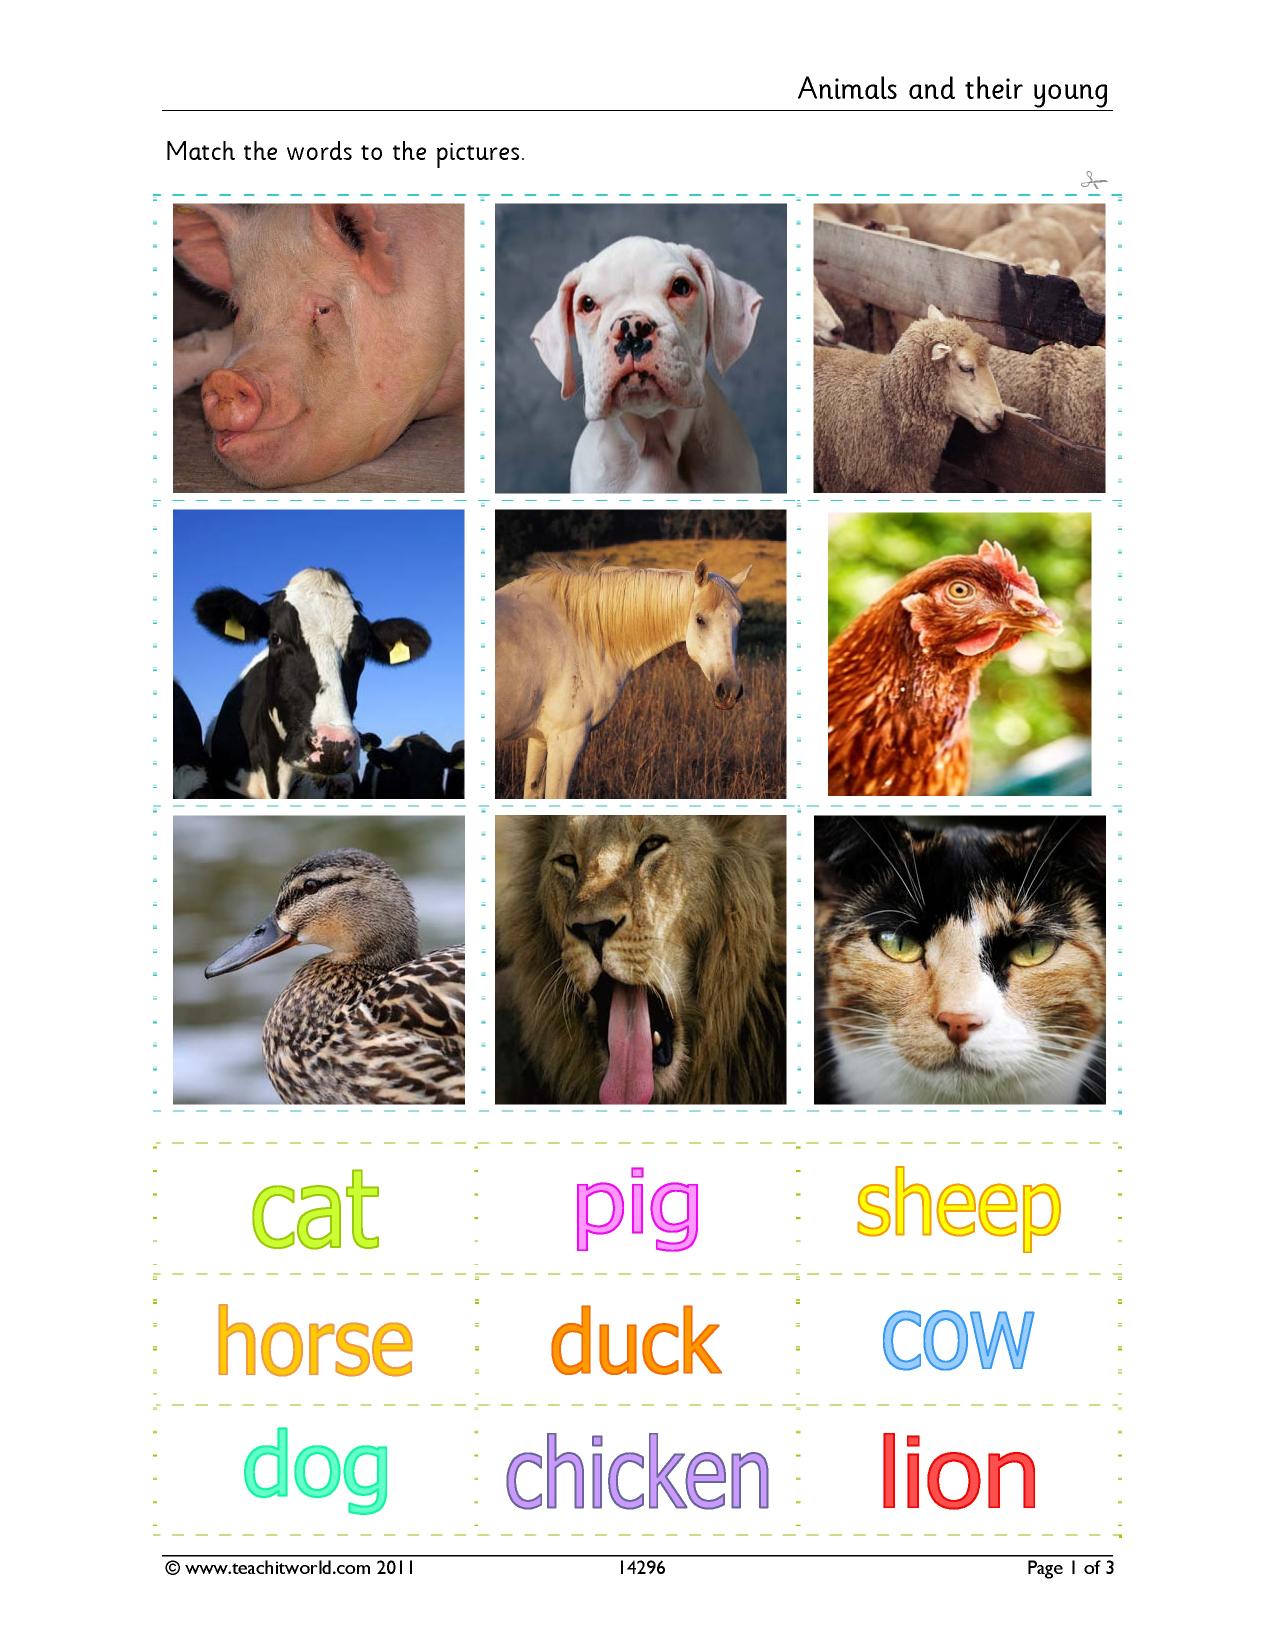 Match animals to their young | EYFS - KS1 Science | Teachit